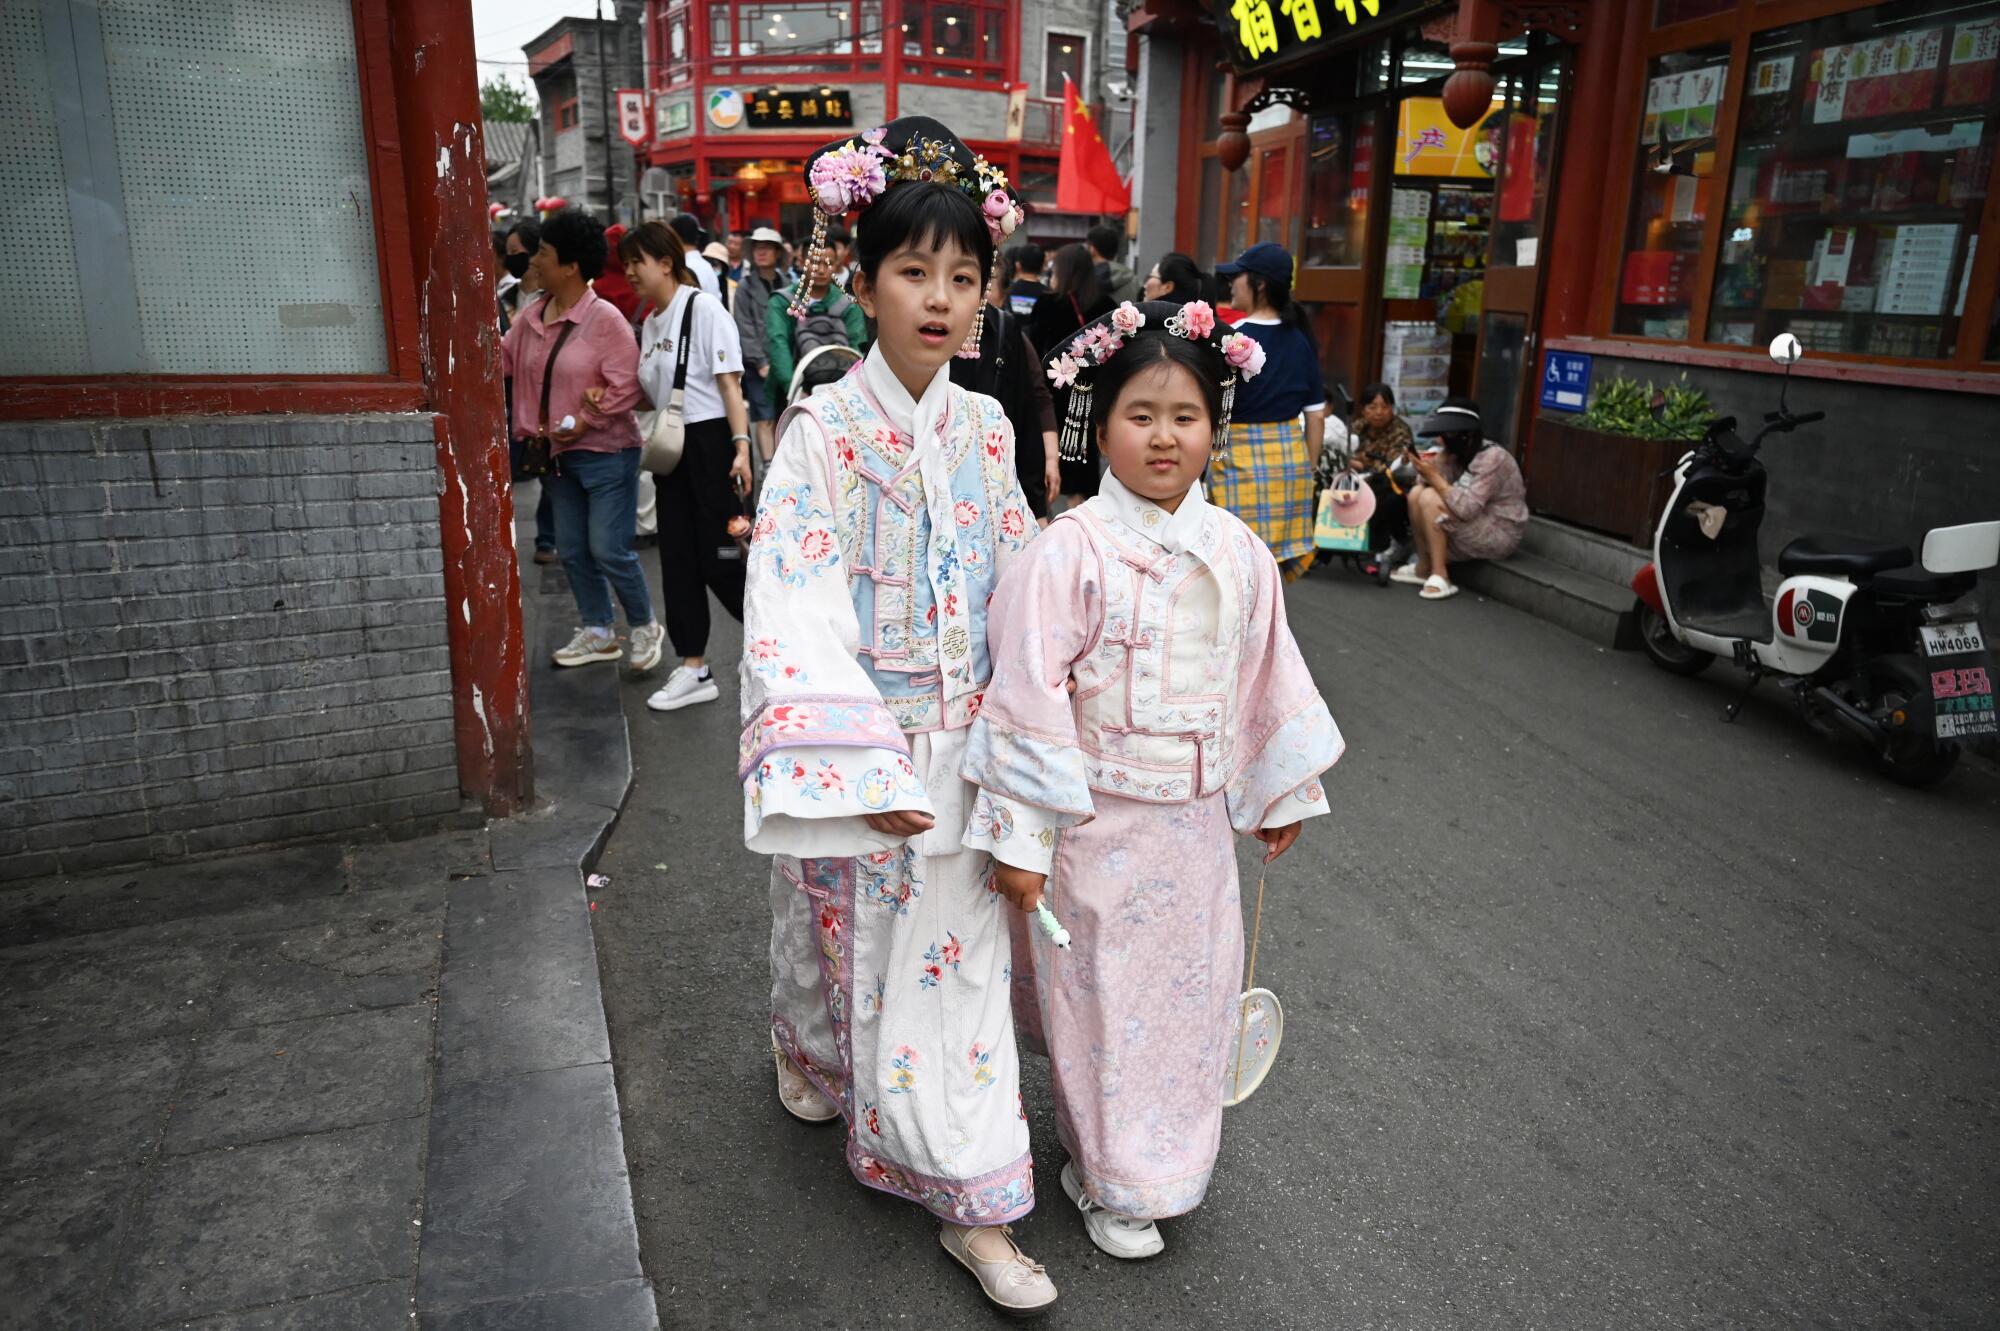 Two girls wearing traditional flowing robes in pastel colors walk in a tourist shopping area